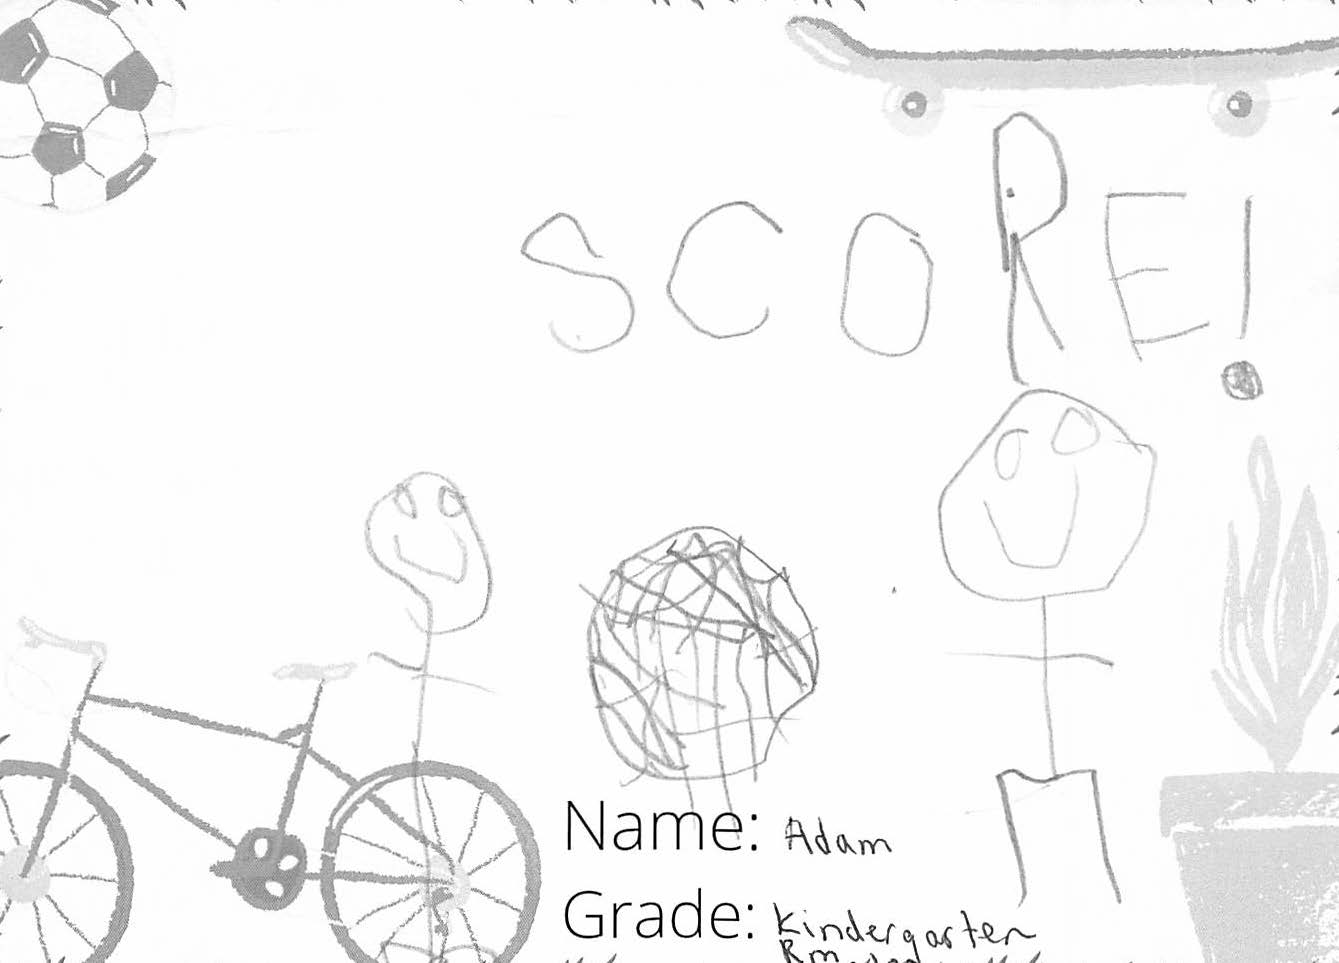 Pencil drawing for the SCORE! logo contest. There are two people playing soccer below the word: SCORE!